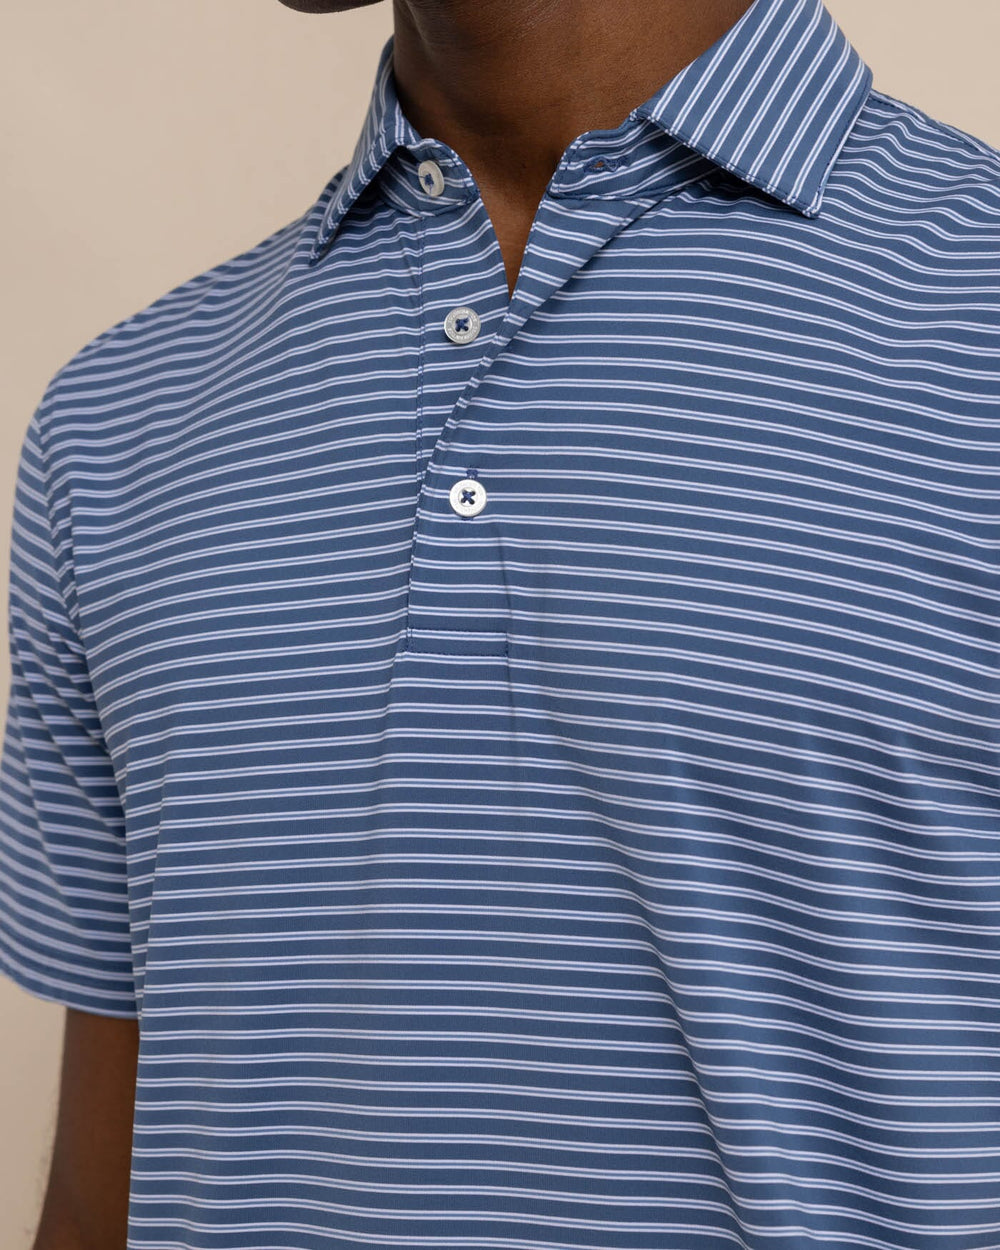 The detail view of the Southern Tide brrr eeze Beattie Stripe Performance Polo by Southern Tide - Aged Denim